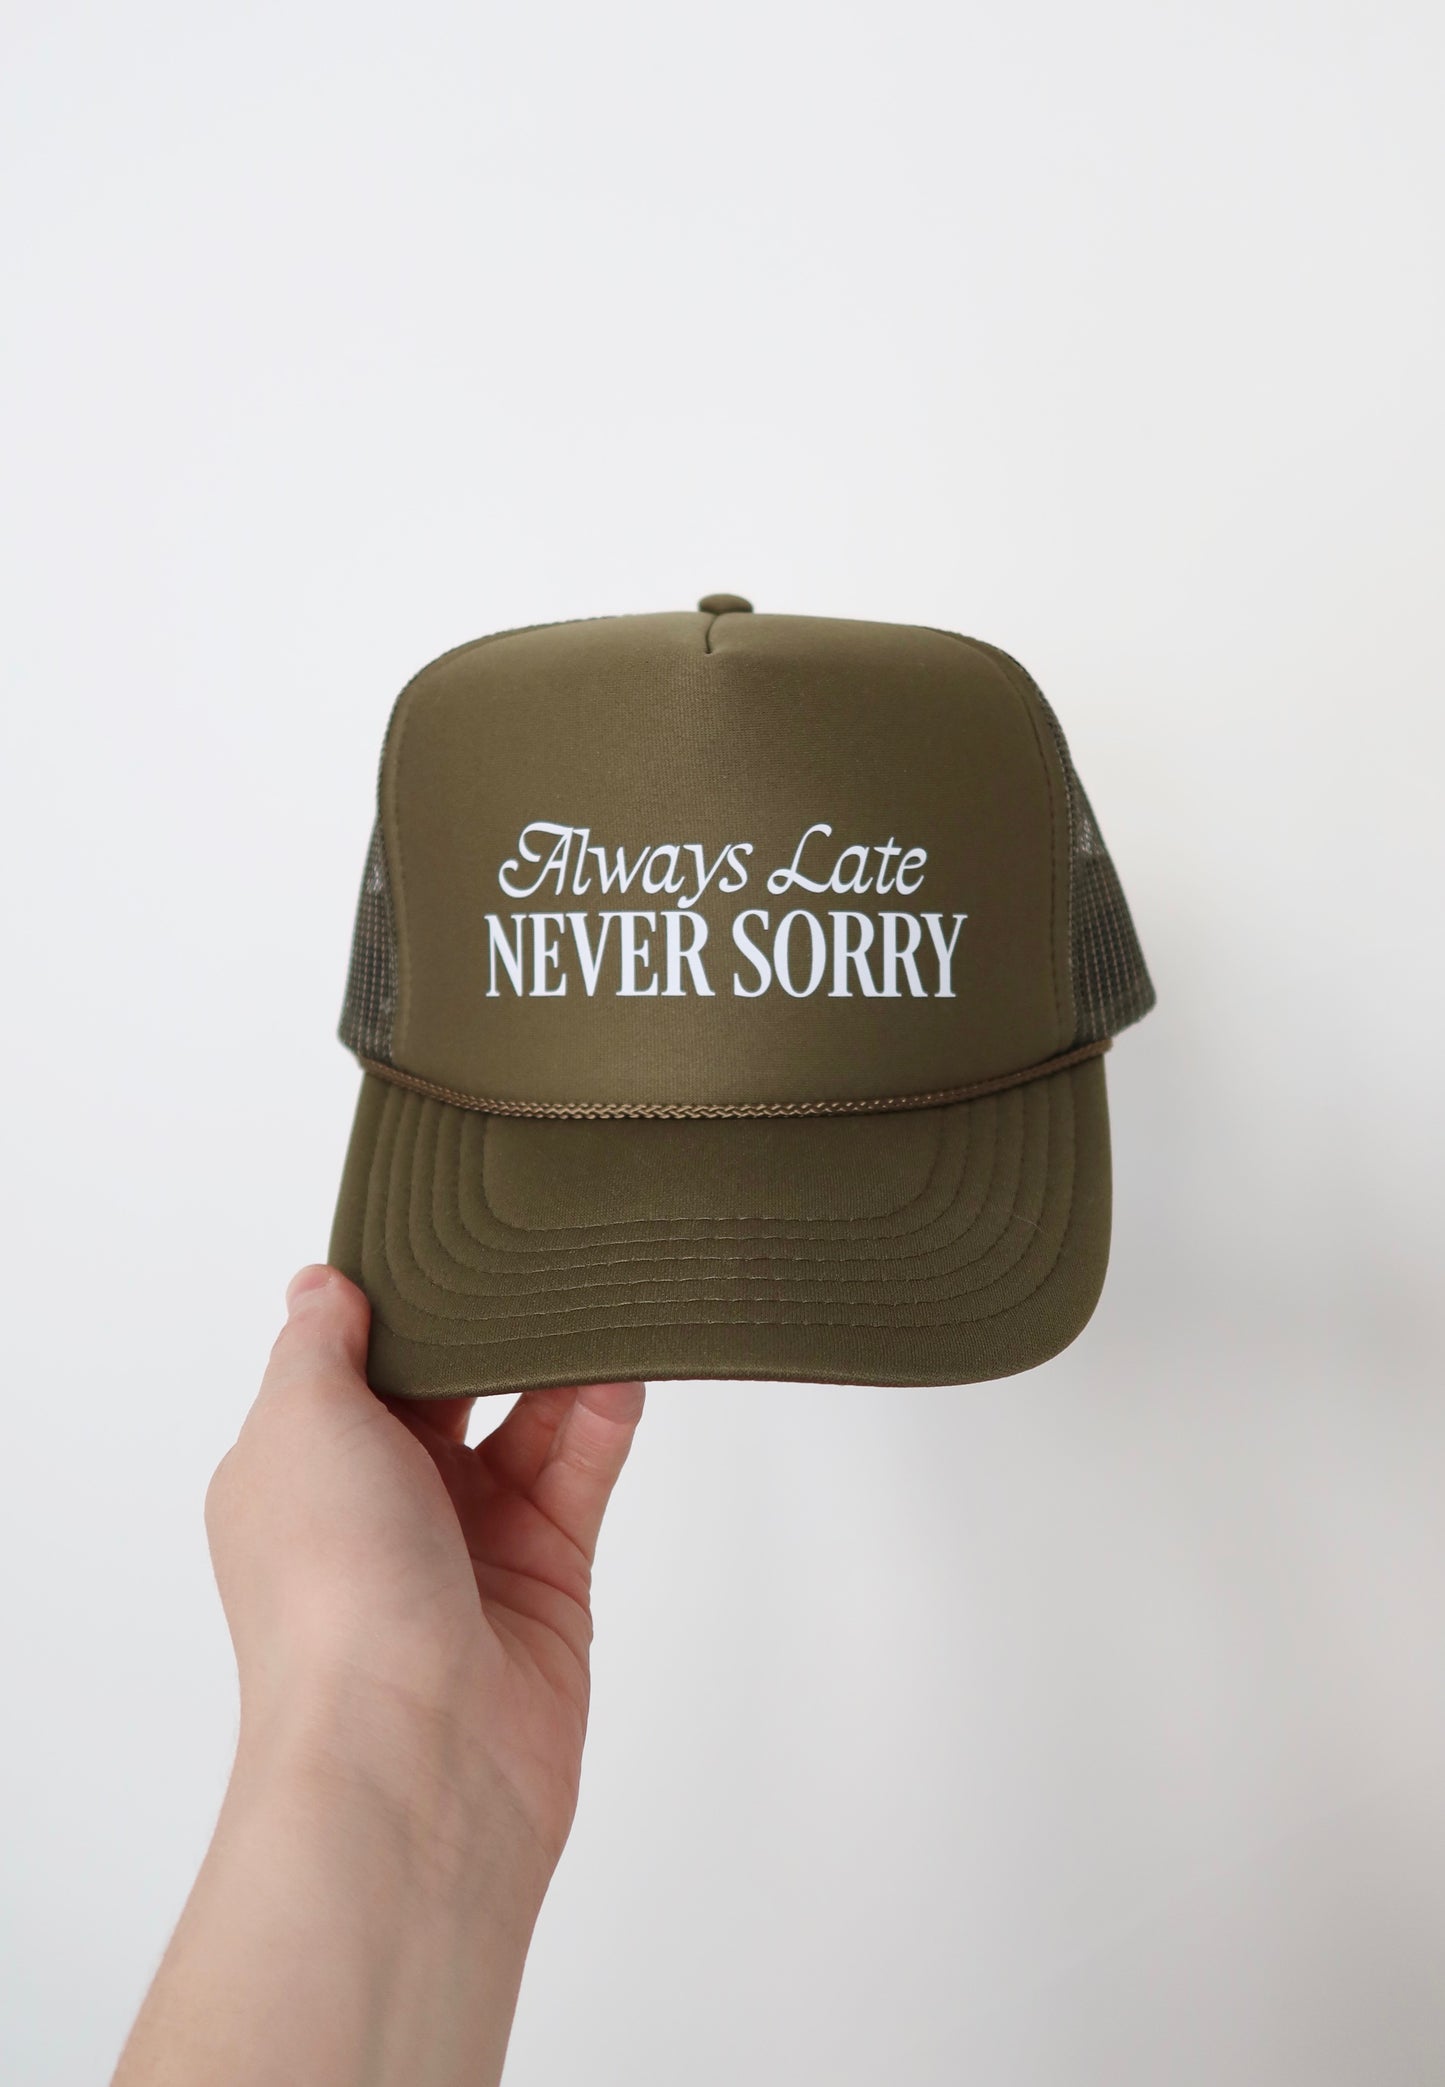 “Always Late Never Sorry” Trucker Hat